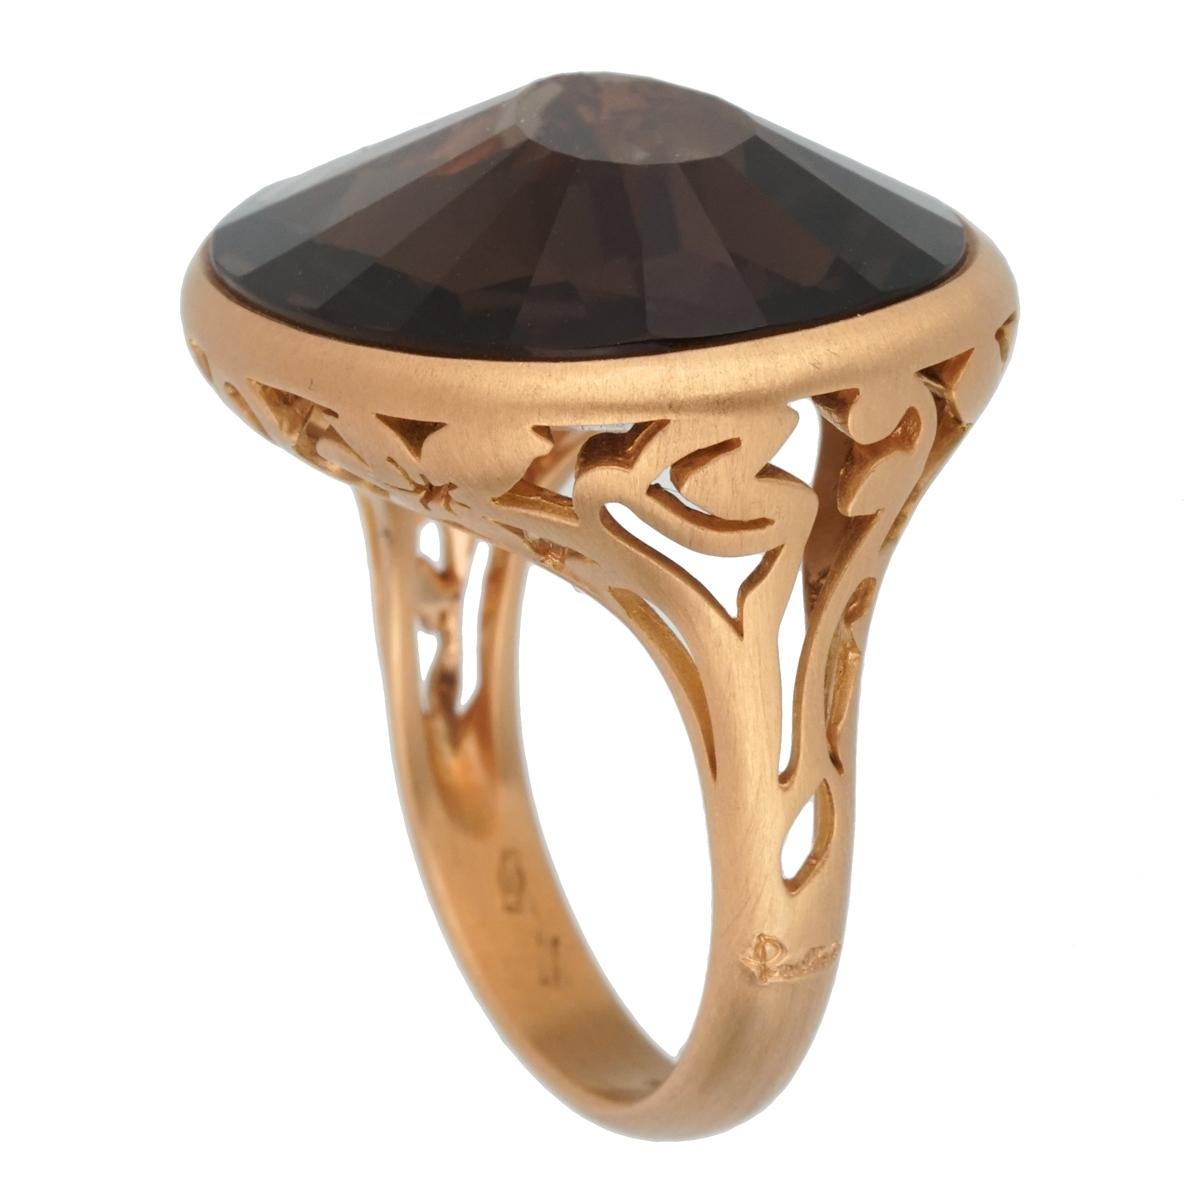 A chic brand new Pomellato cocktail ring showcasing a 10.19ct Smoky Quartz set in 18k rose gold. The ring measures a size 7.25 and can be resized

Pomellato Retail: $4600
Sku: 2453